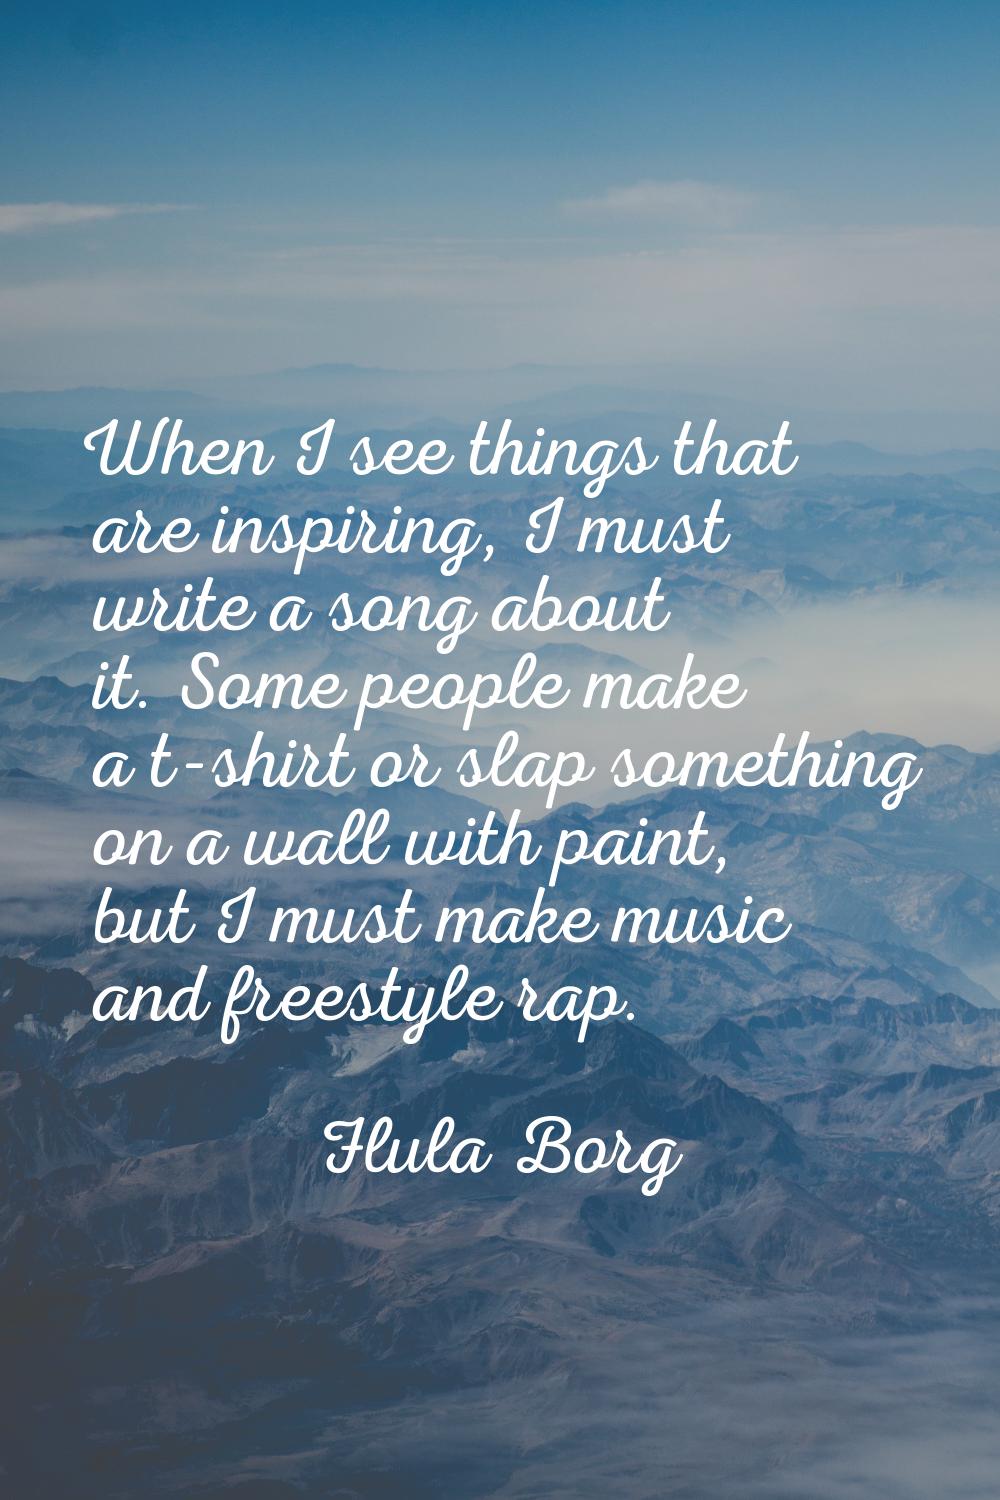 When I see things that are inspiring, I must write a song about it. Some people make a t-shirt or s